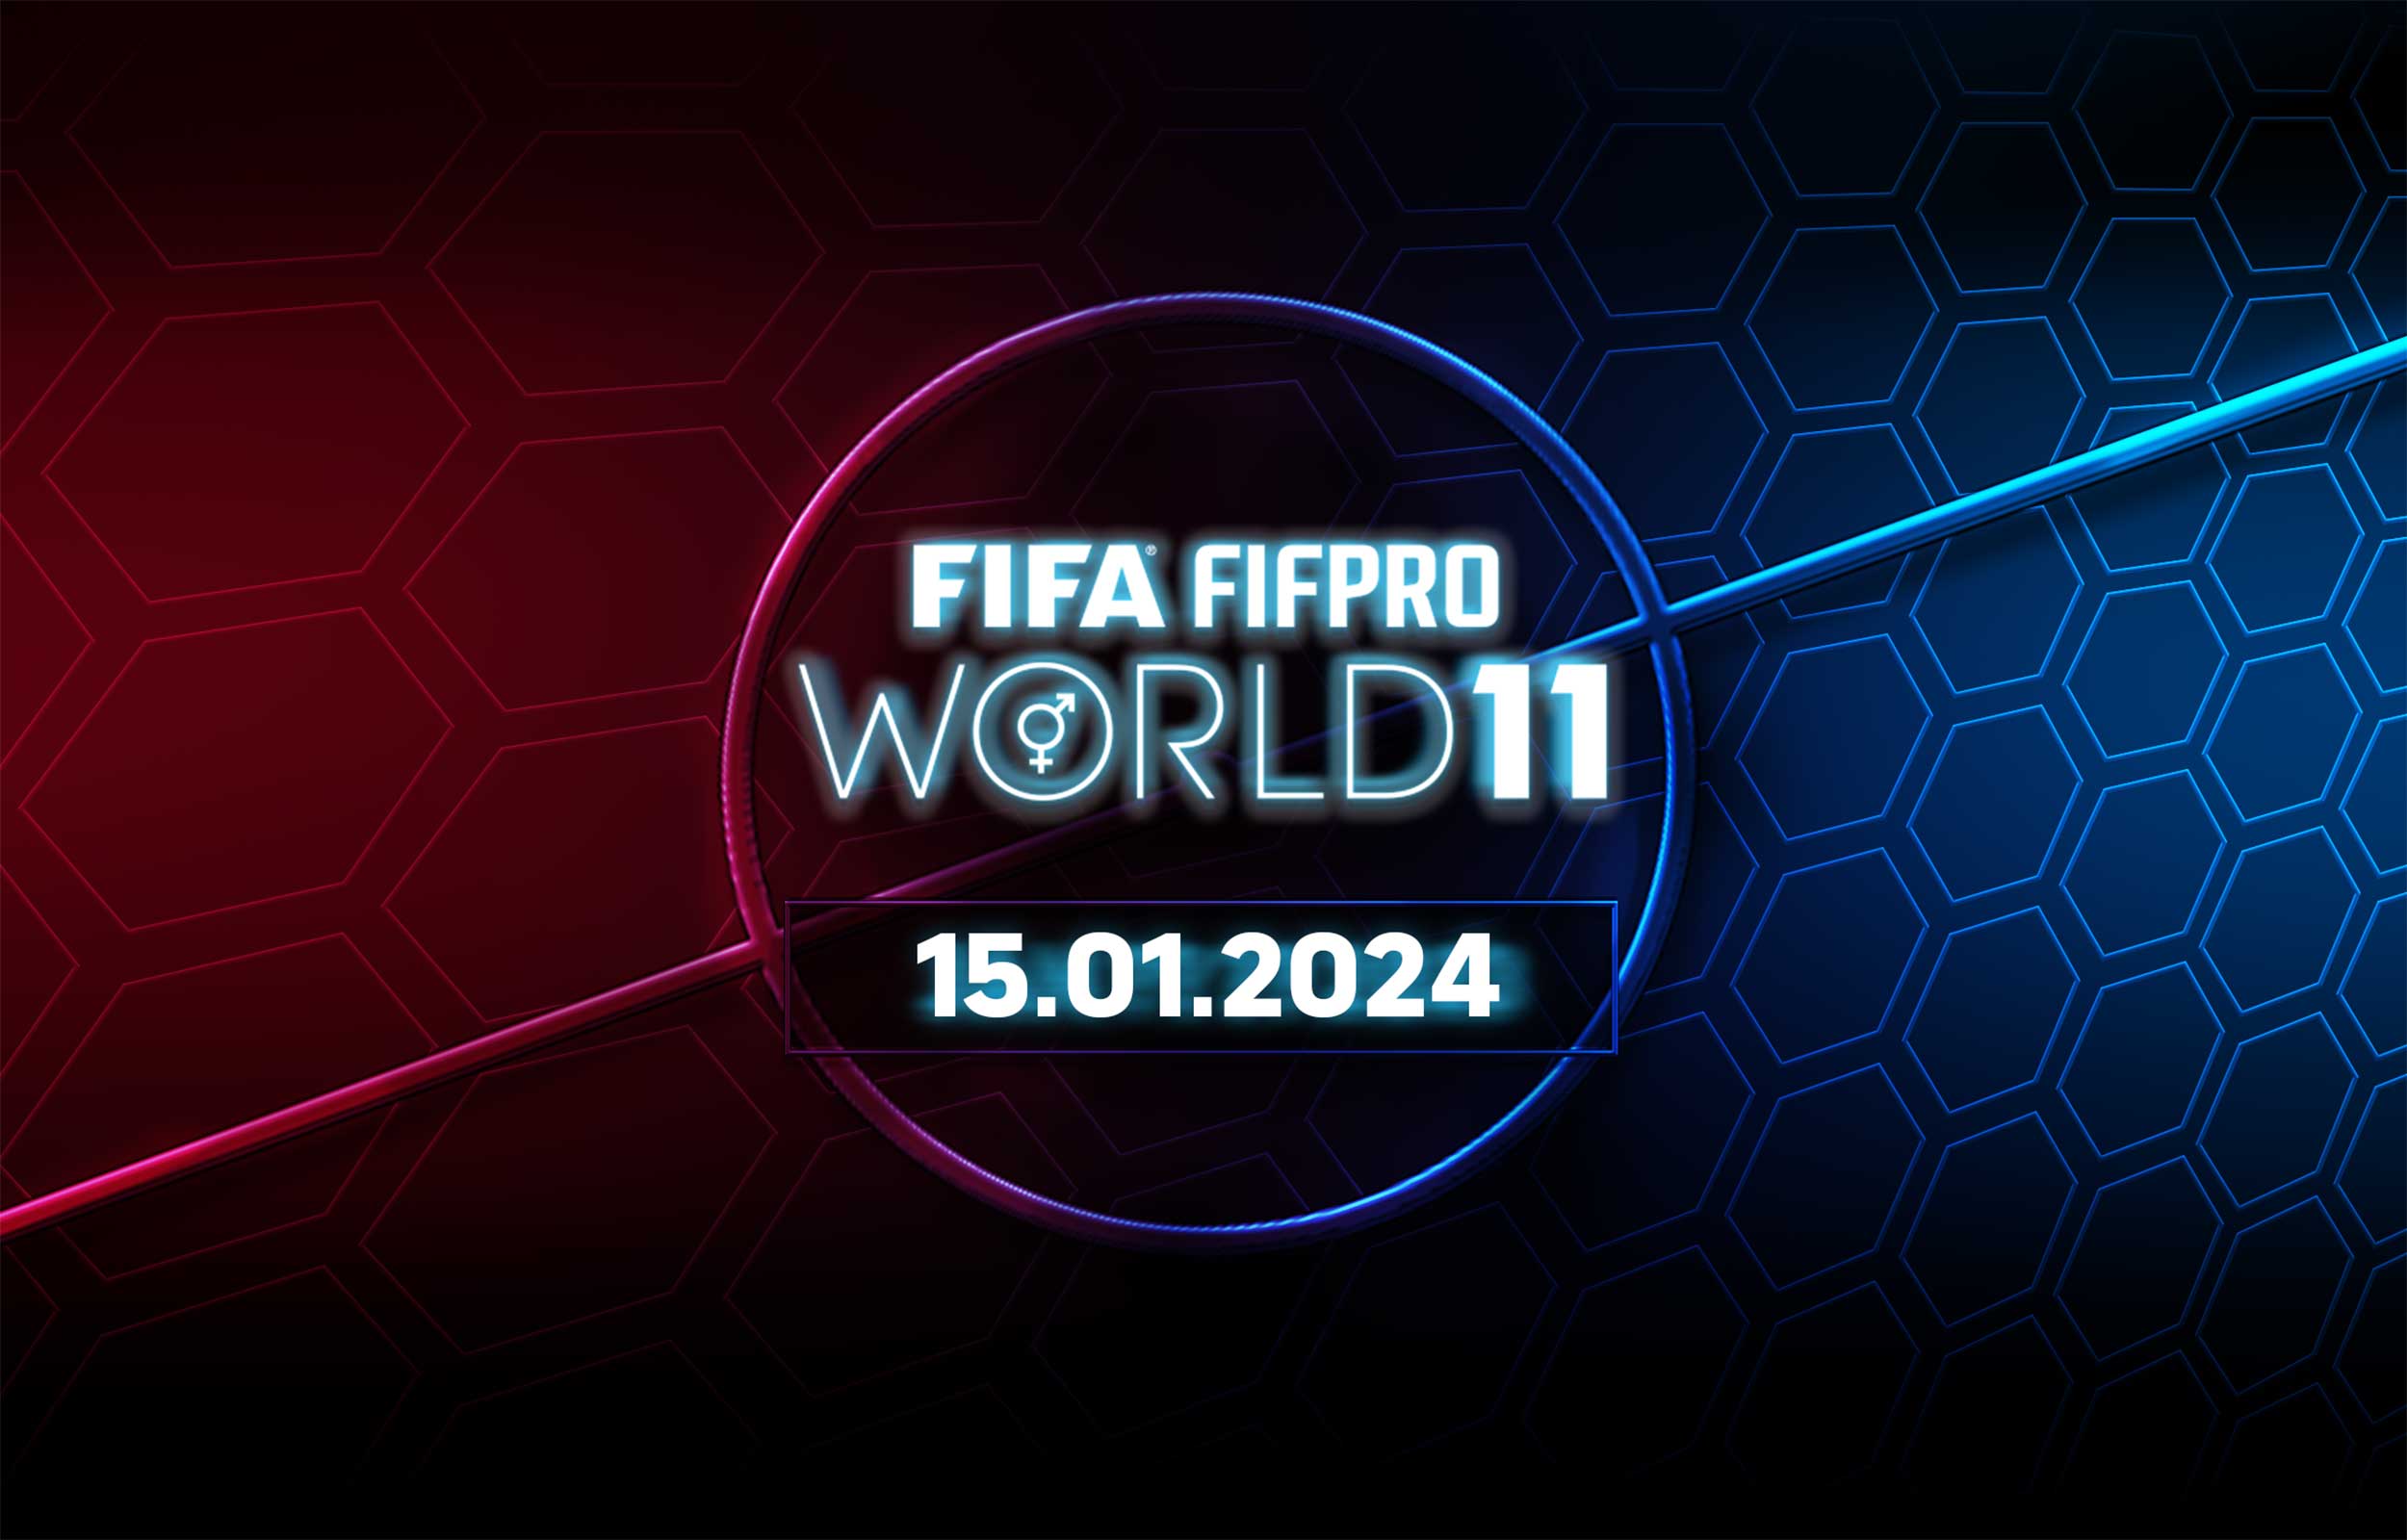 How FIFPRO helped make the 2023 Women's World Cup more professional and  equitable for players - FIFPRO World Players' Union